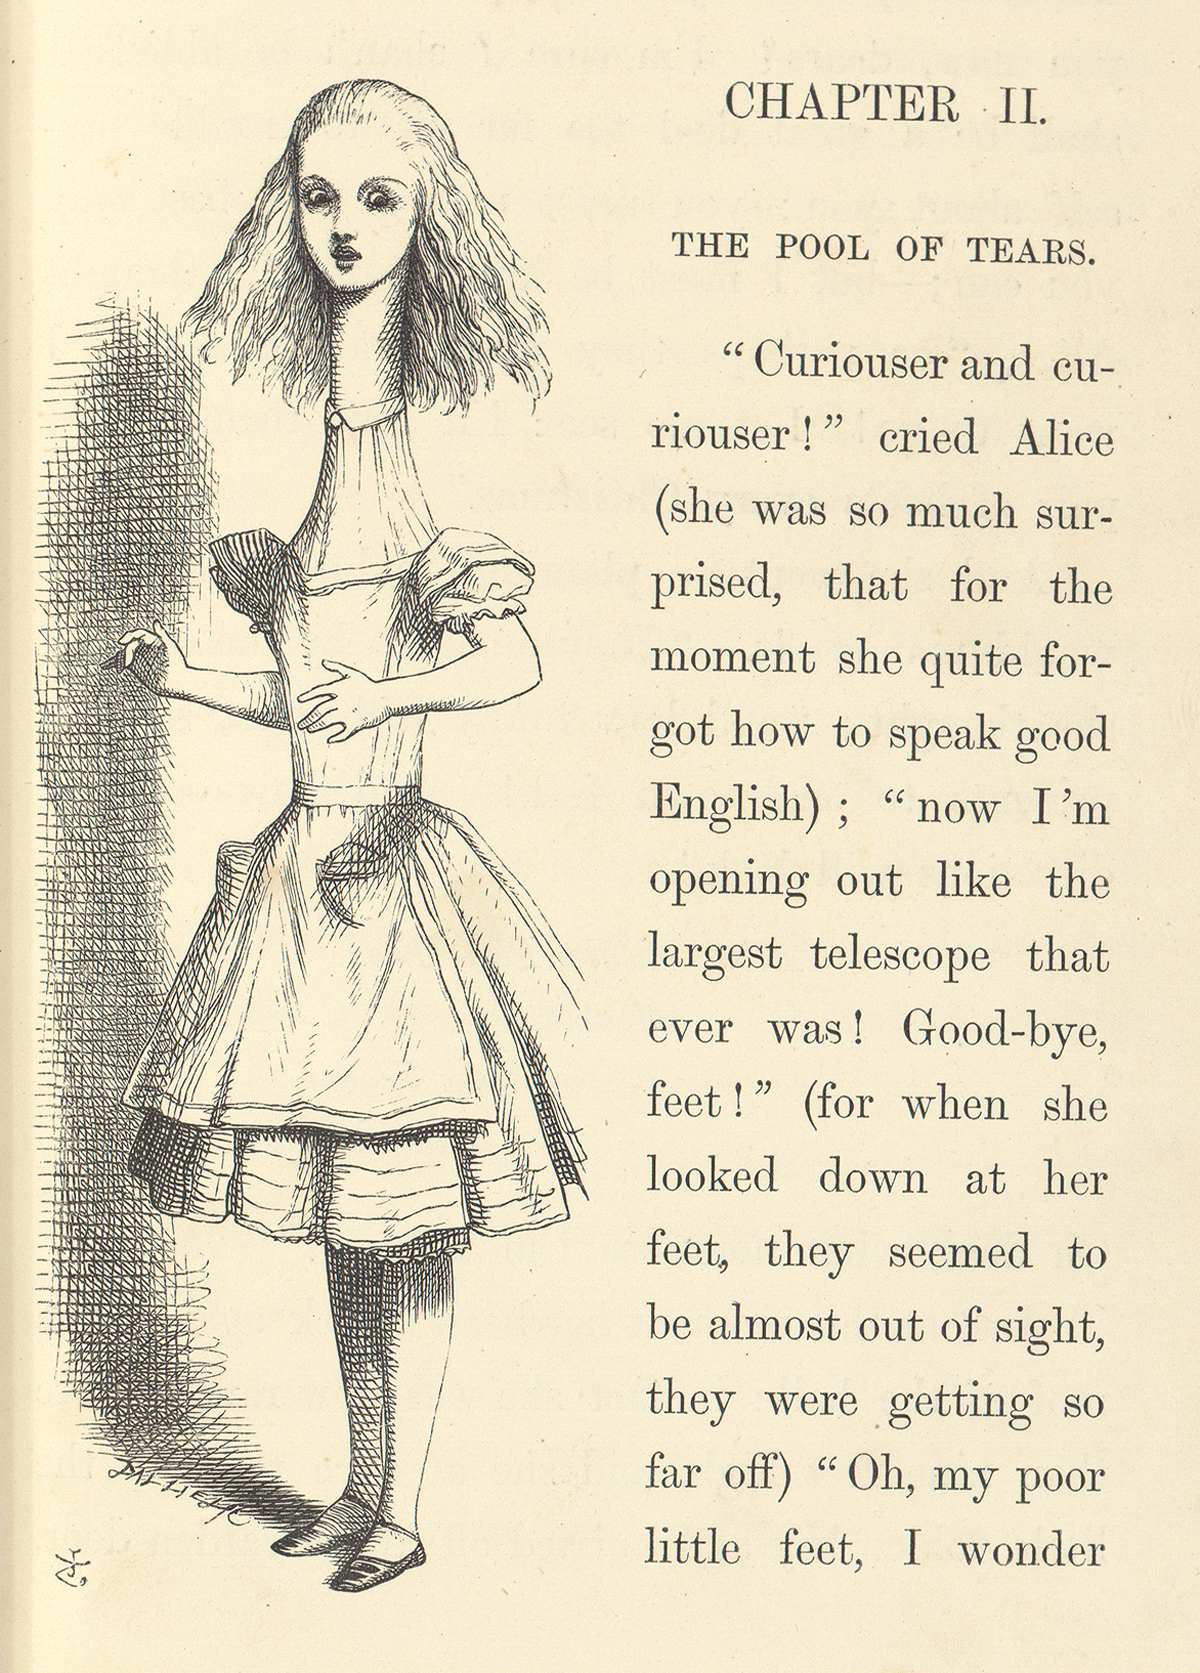 John Tenniel's illustration of Alice from the first published edition of Lewis Carroll's "Alice's Adventures in Wonderland."